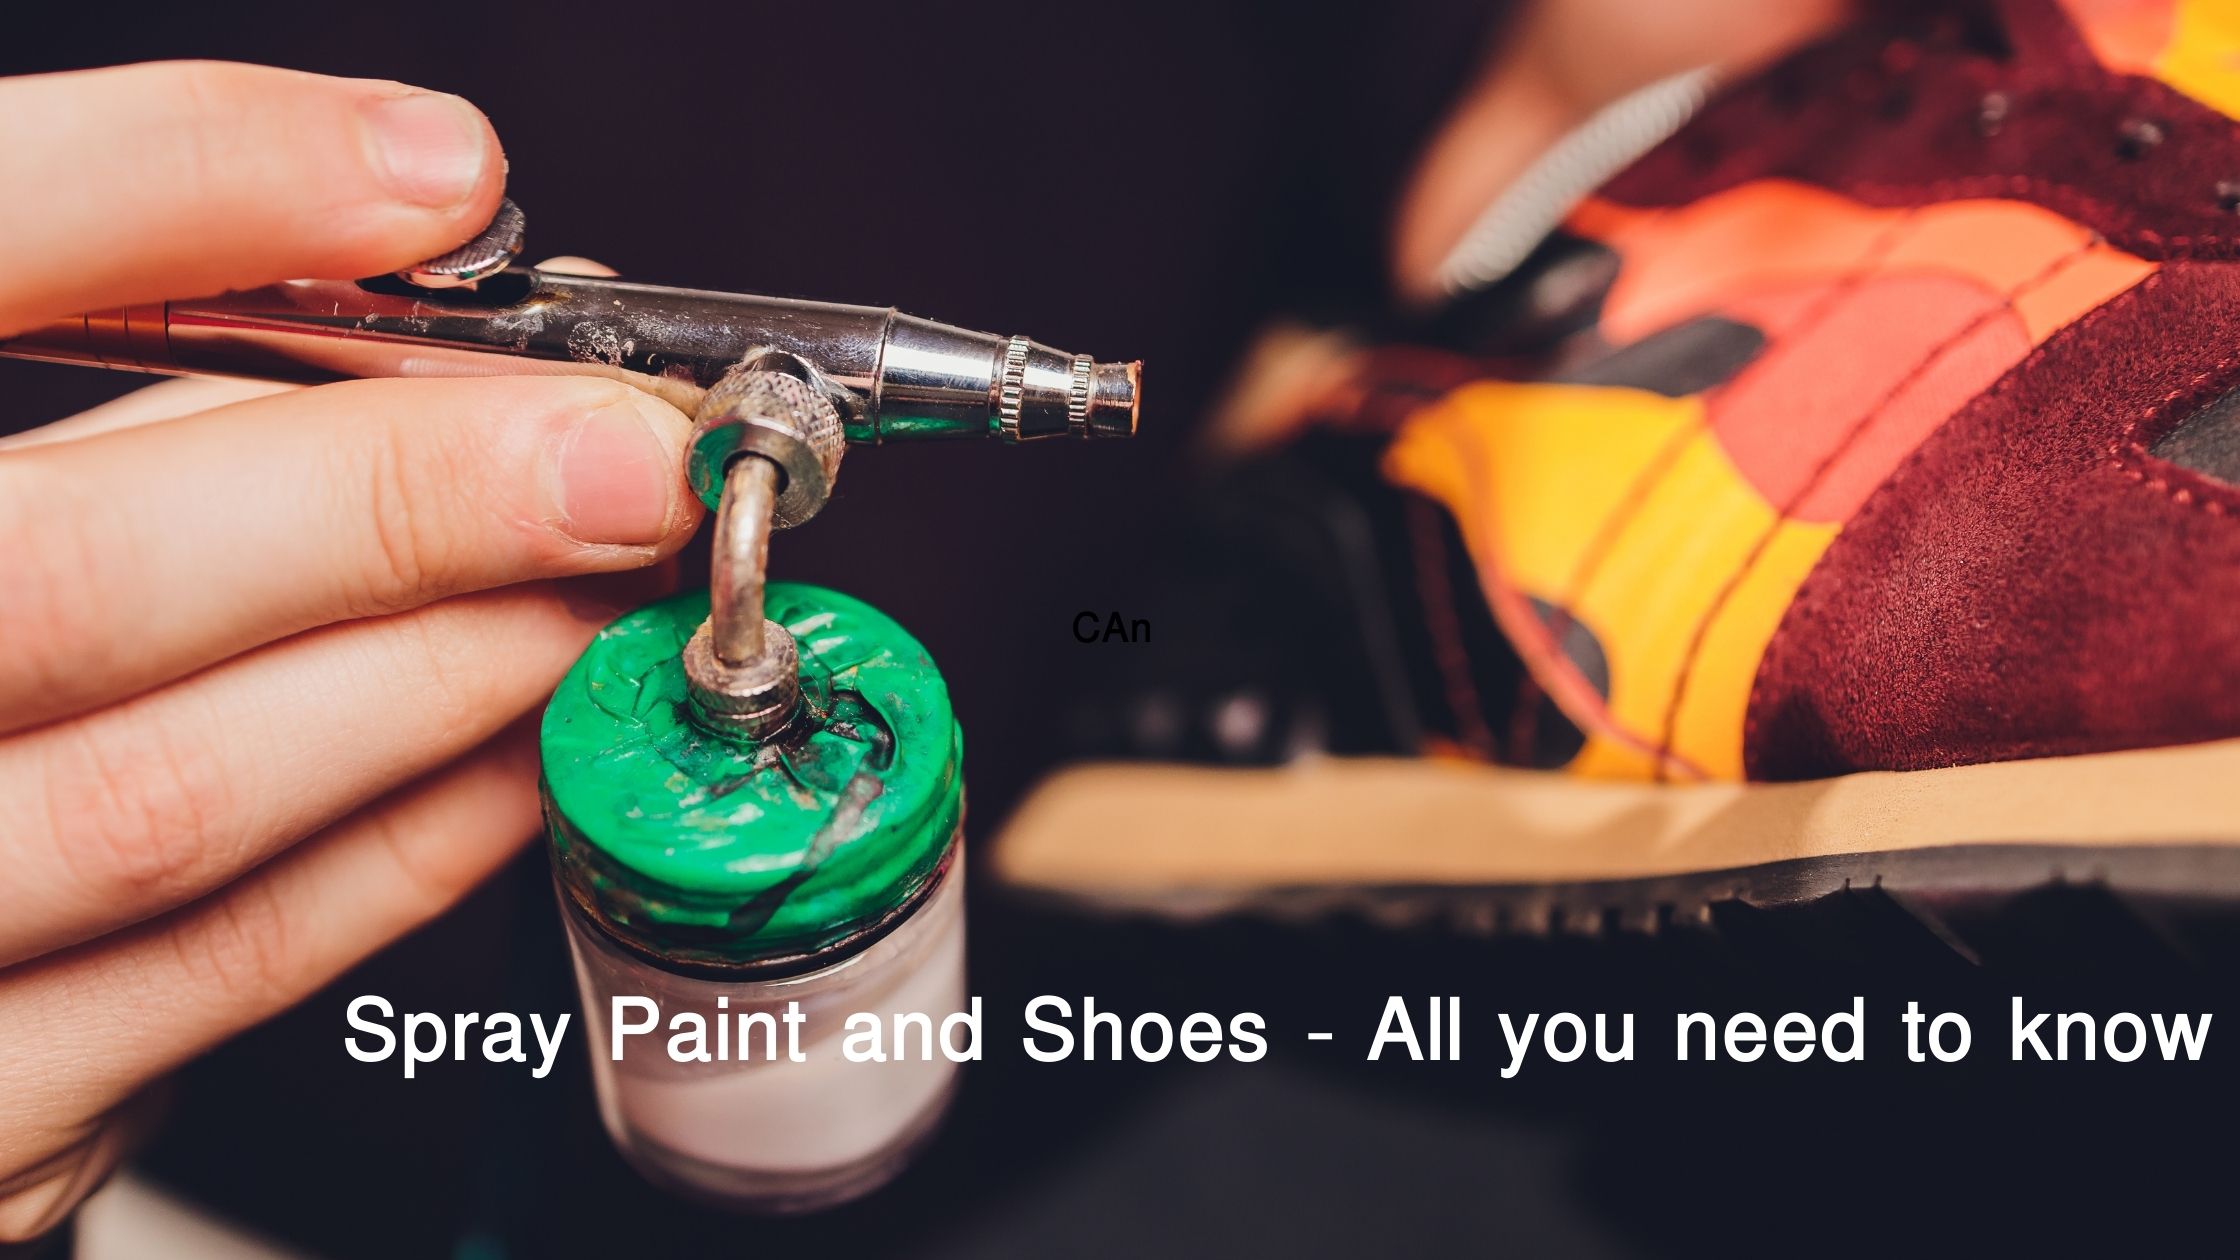 Spray Paint and Shoes - 22 Examples